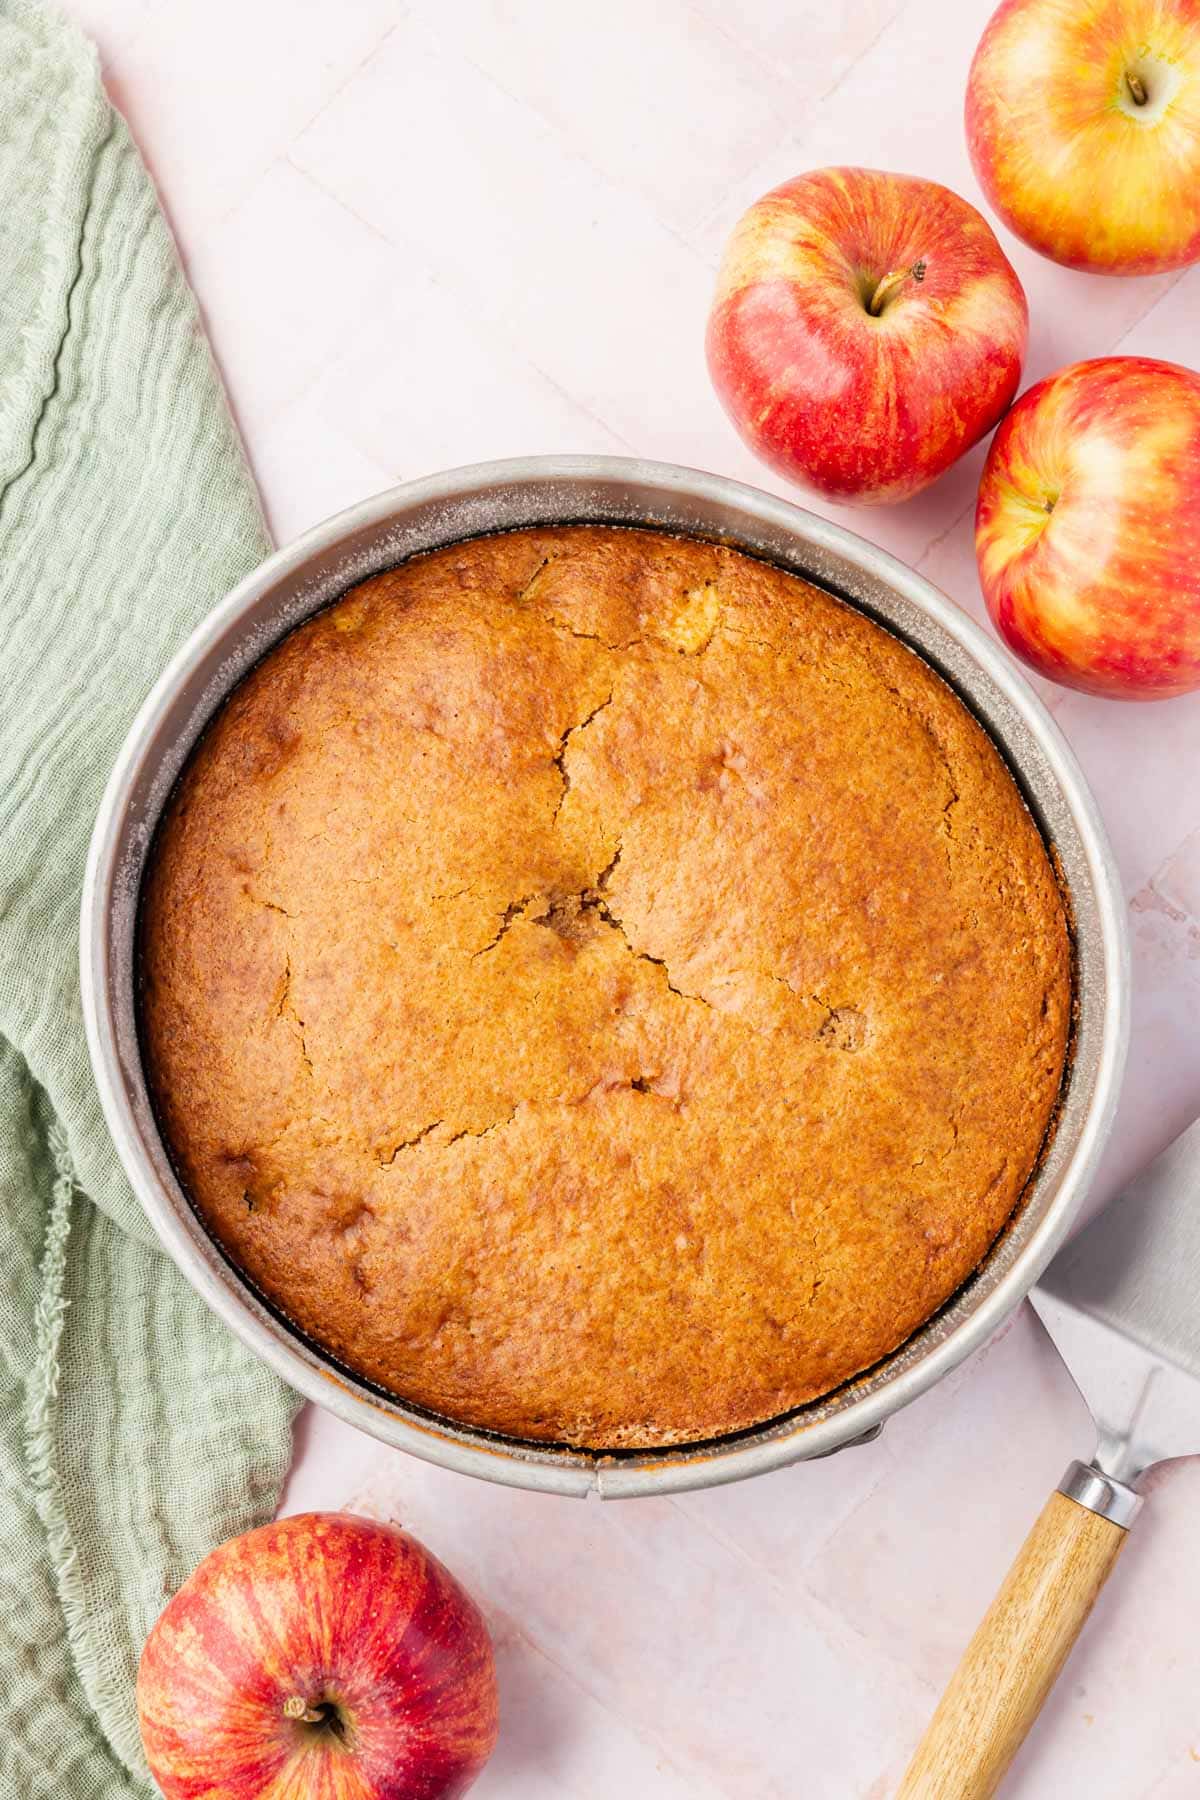 A springform pan with a baked gluten-free apple cake in it surrounded by gala apples.